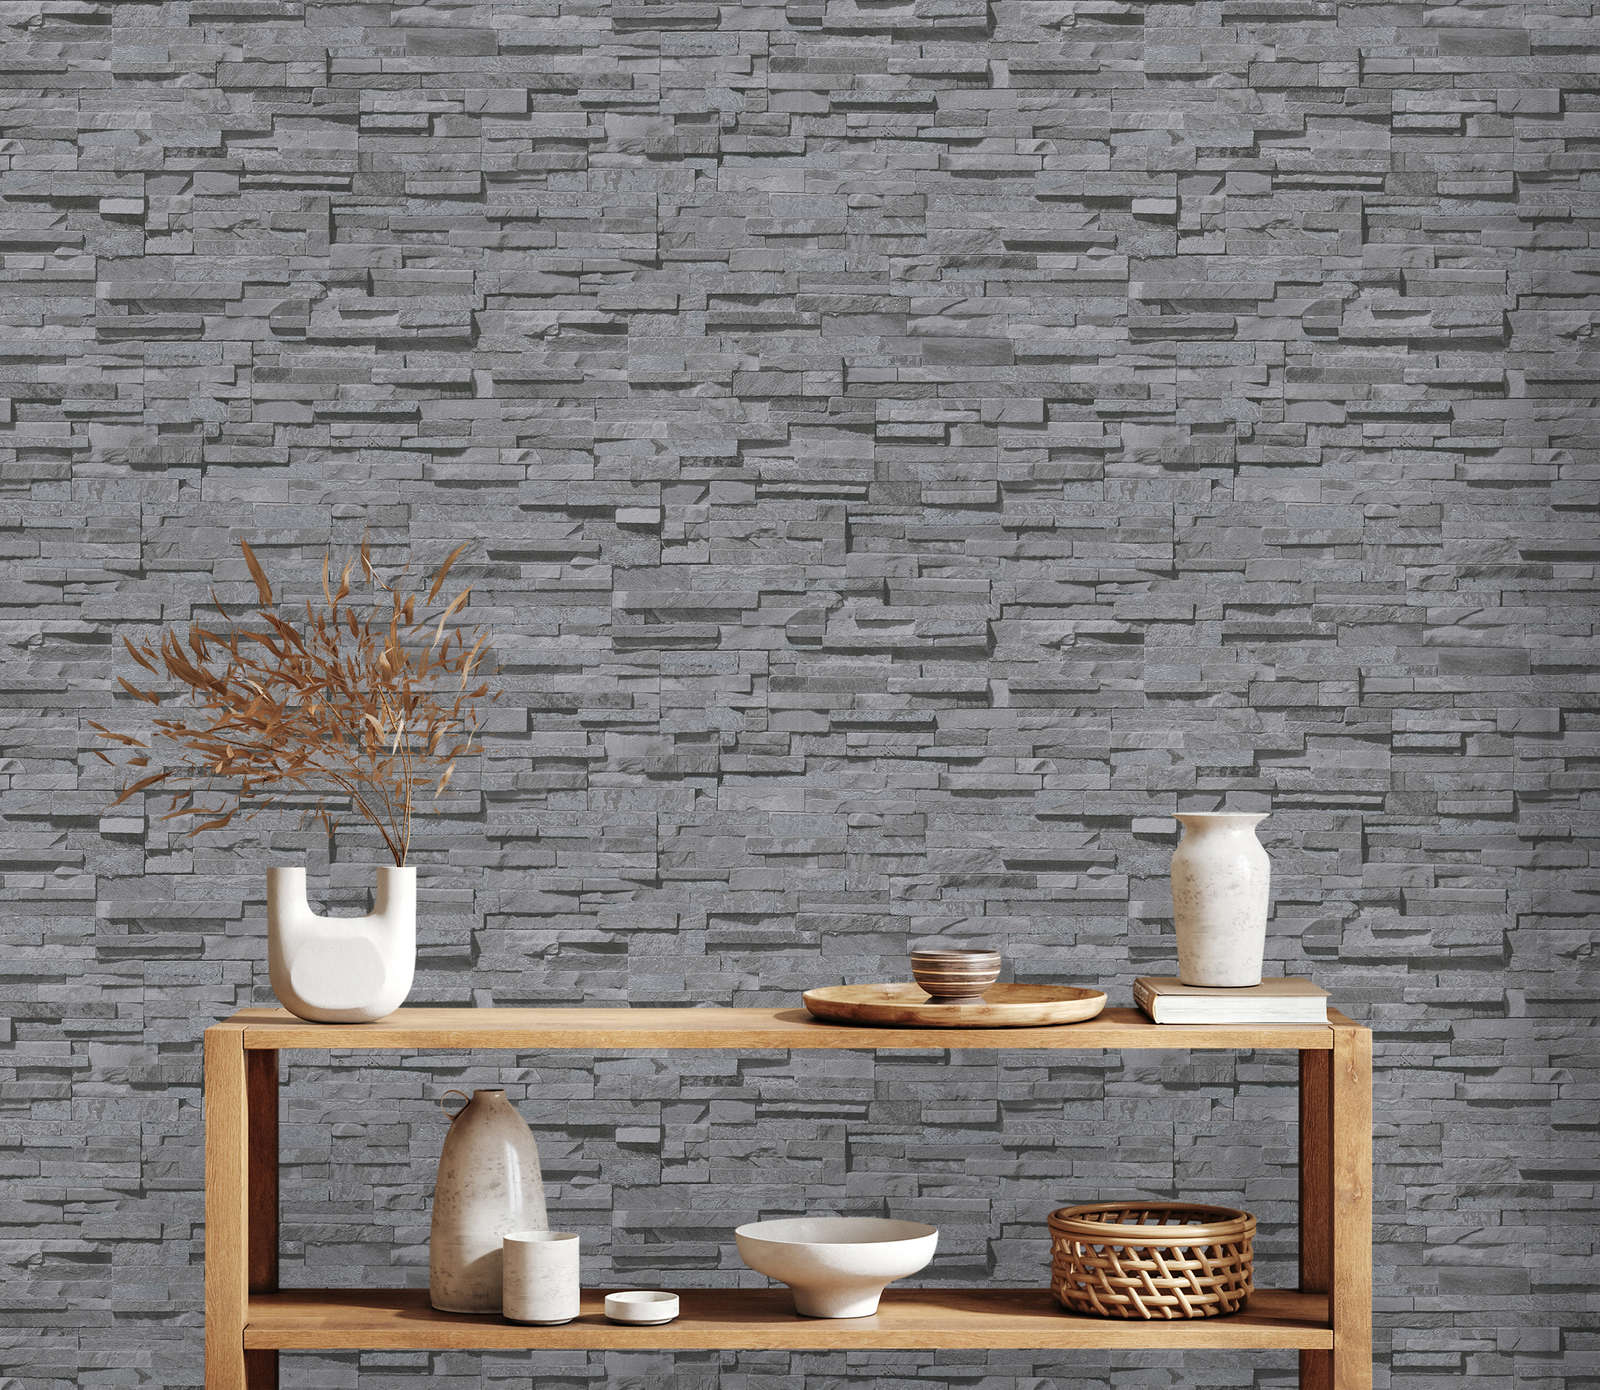             Non-woven wallpaper with stone look & gloss effect - grey
        